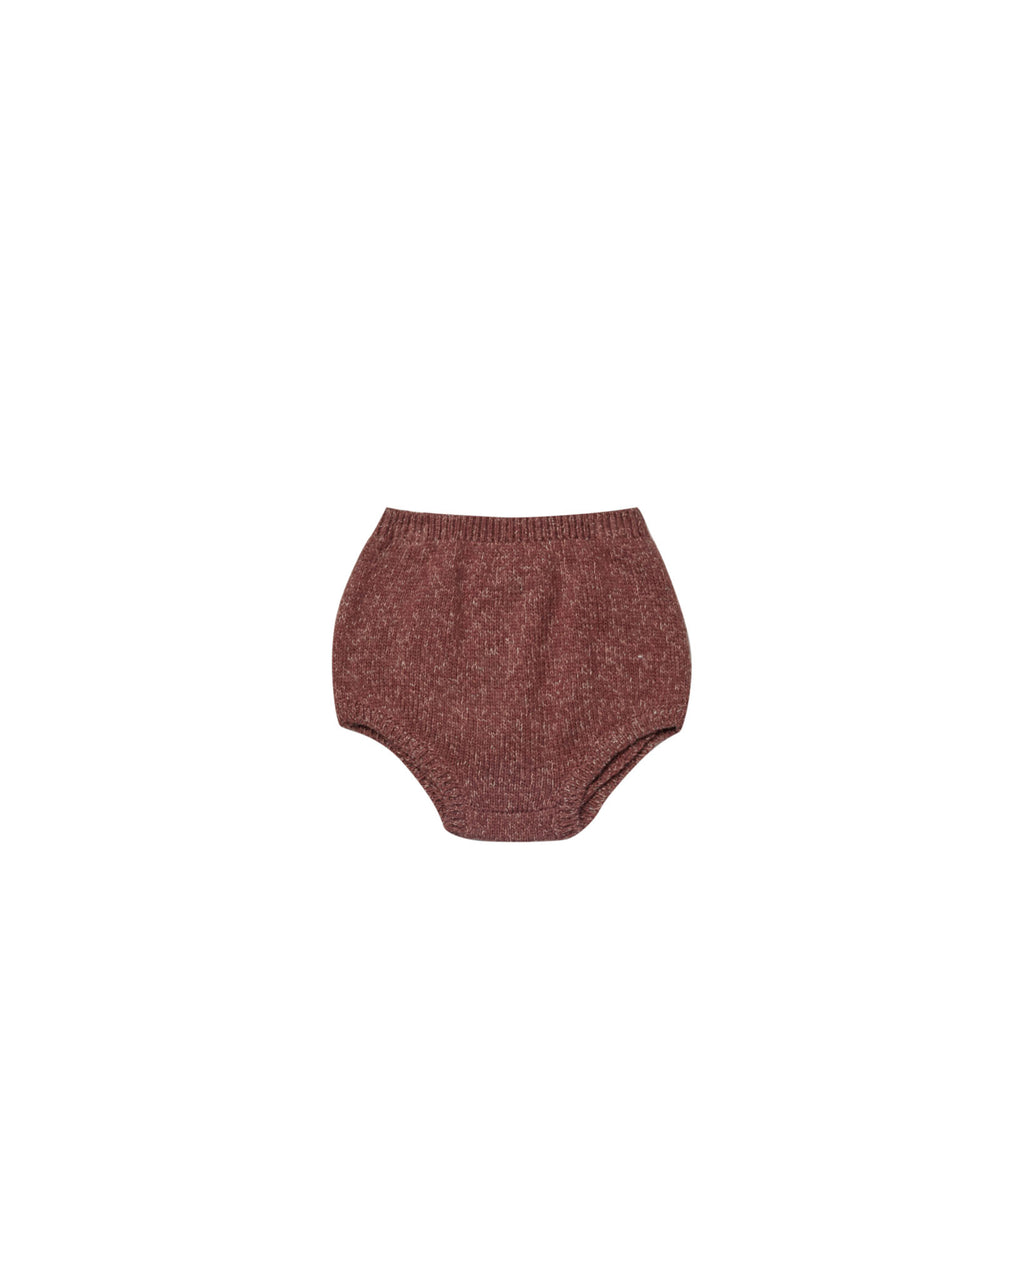 Quincy Mae Knit Bloomer- Heathered Plum